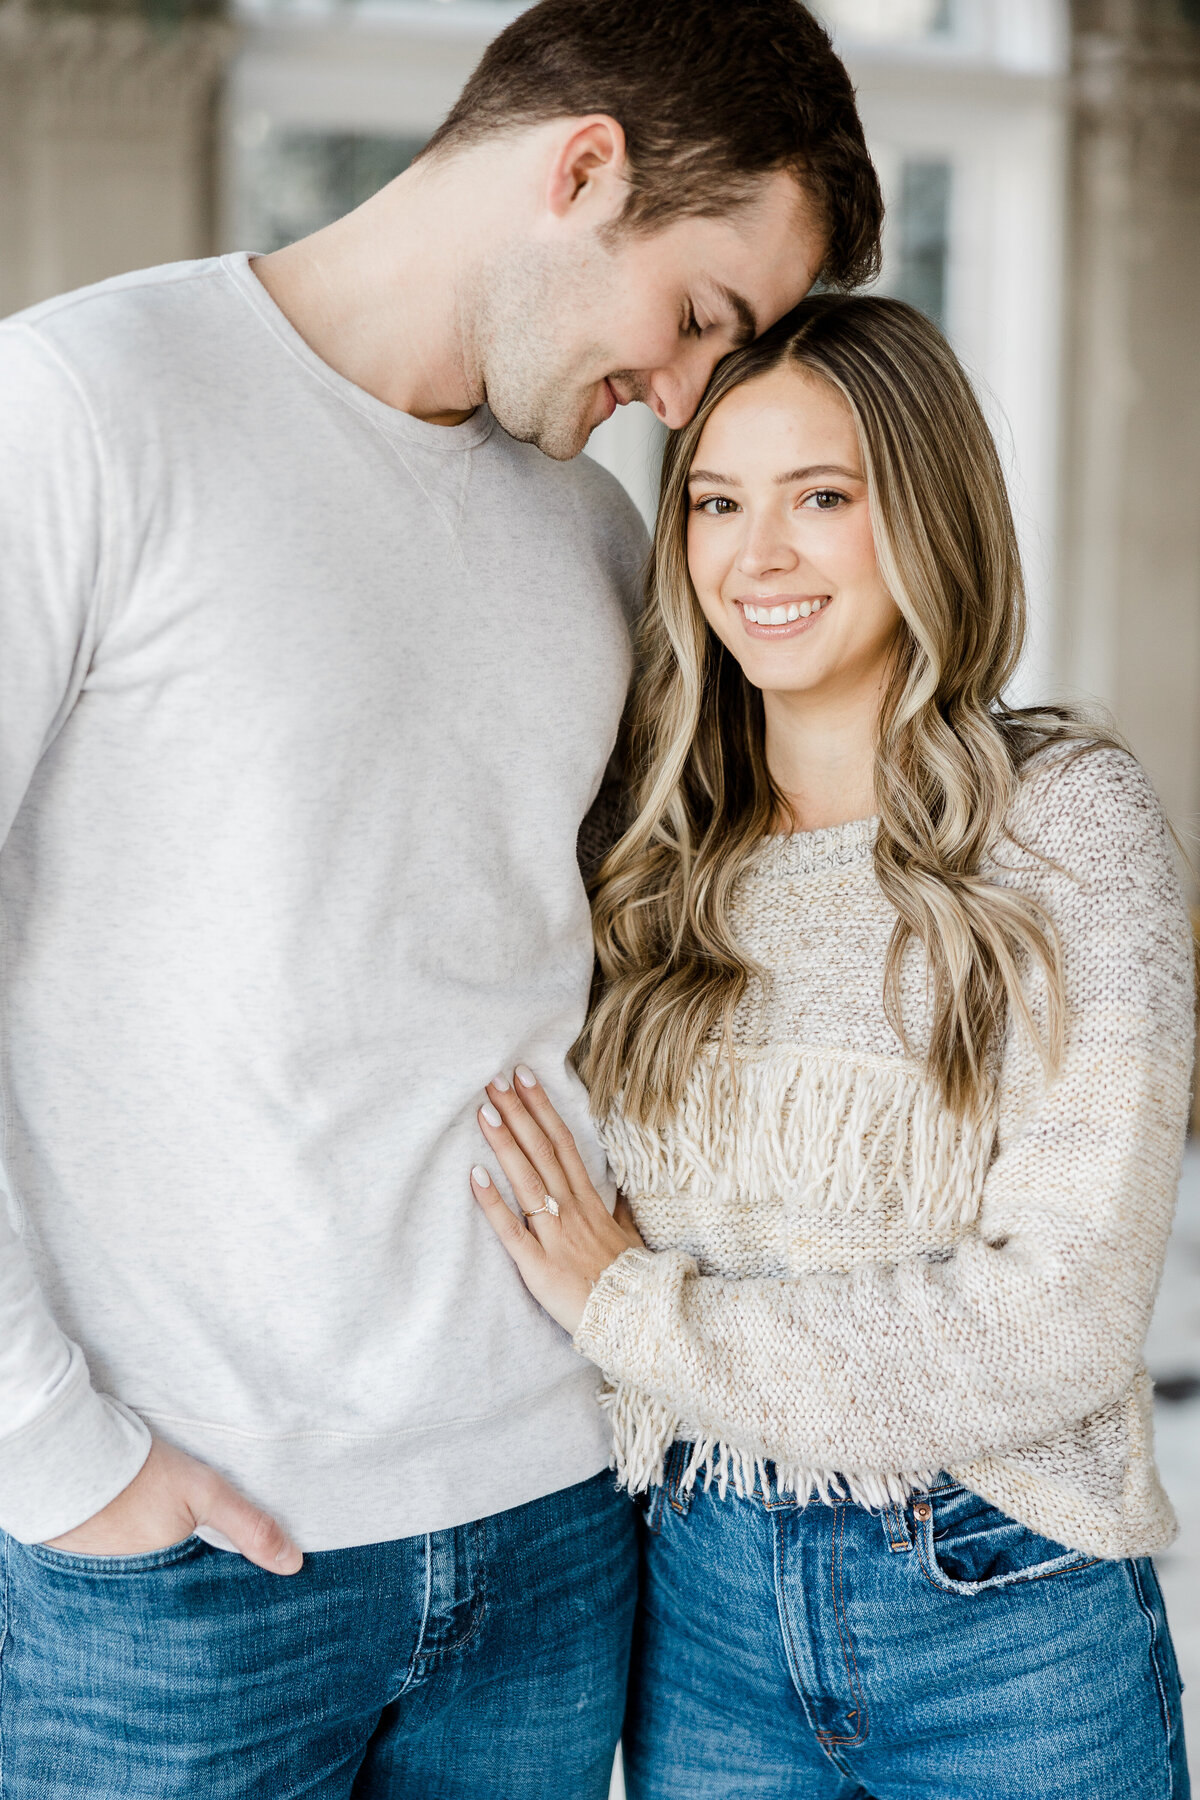 girl smiling at camera while fiance snuggles her